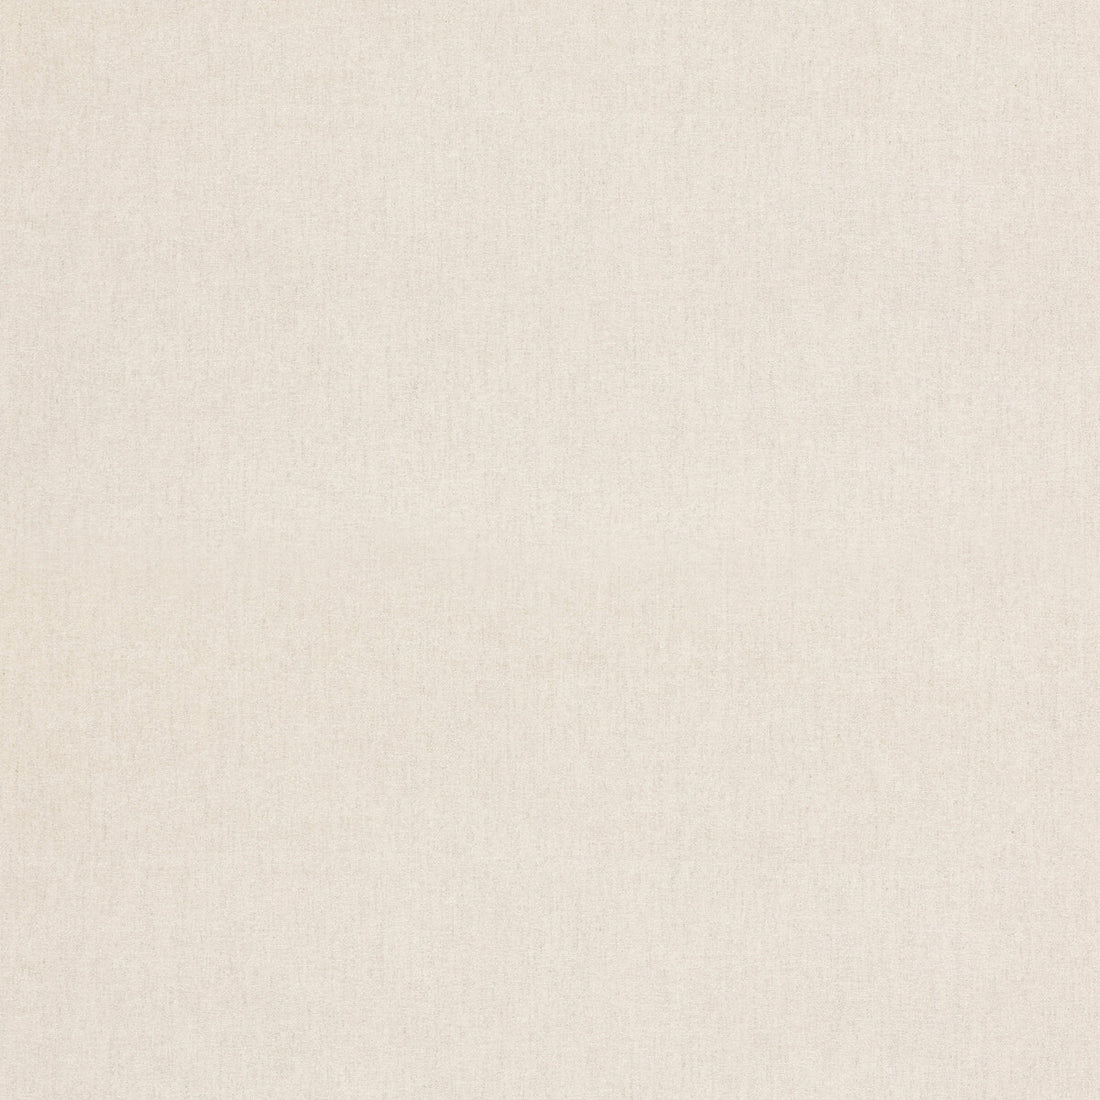 Kankan fabric in ivory color - pattern ED85381.104.0 - by Threads in the Quintessential Textures collection